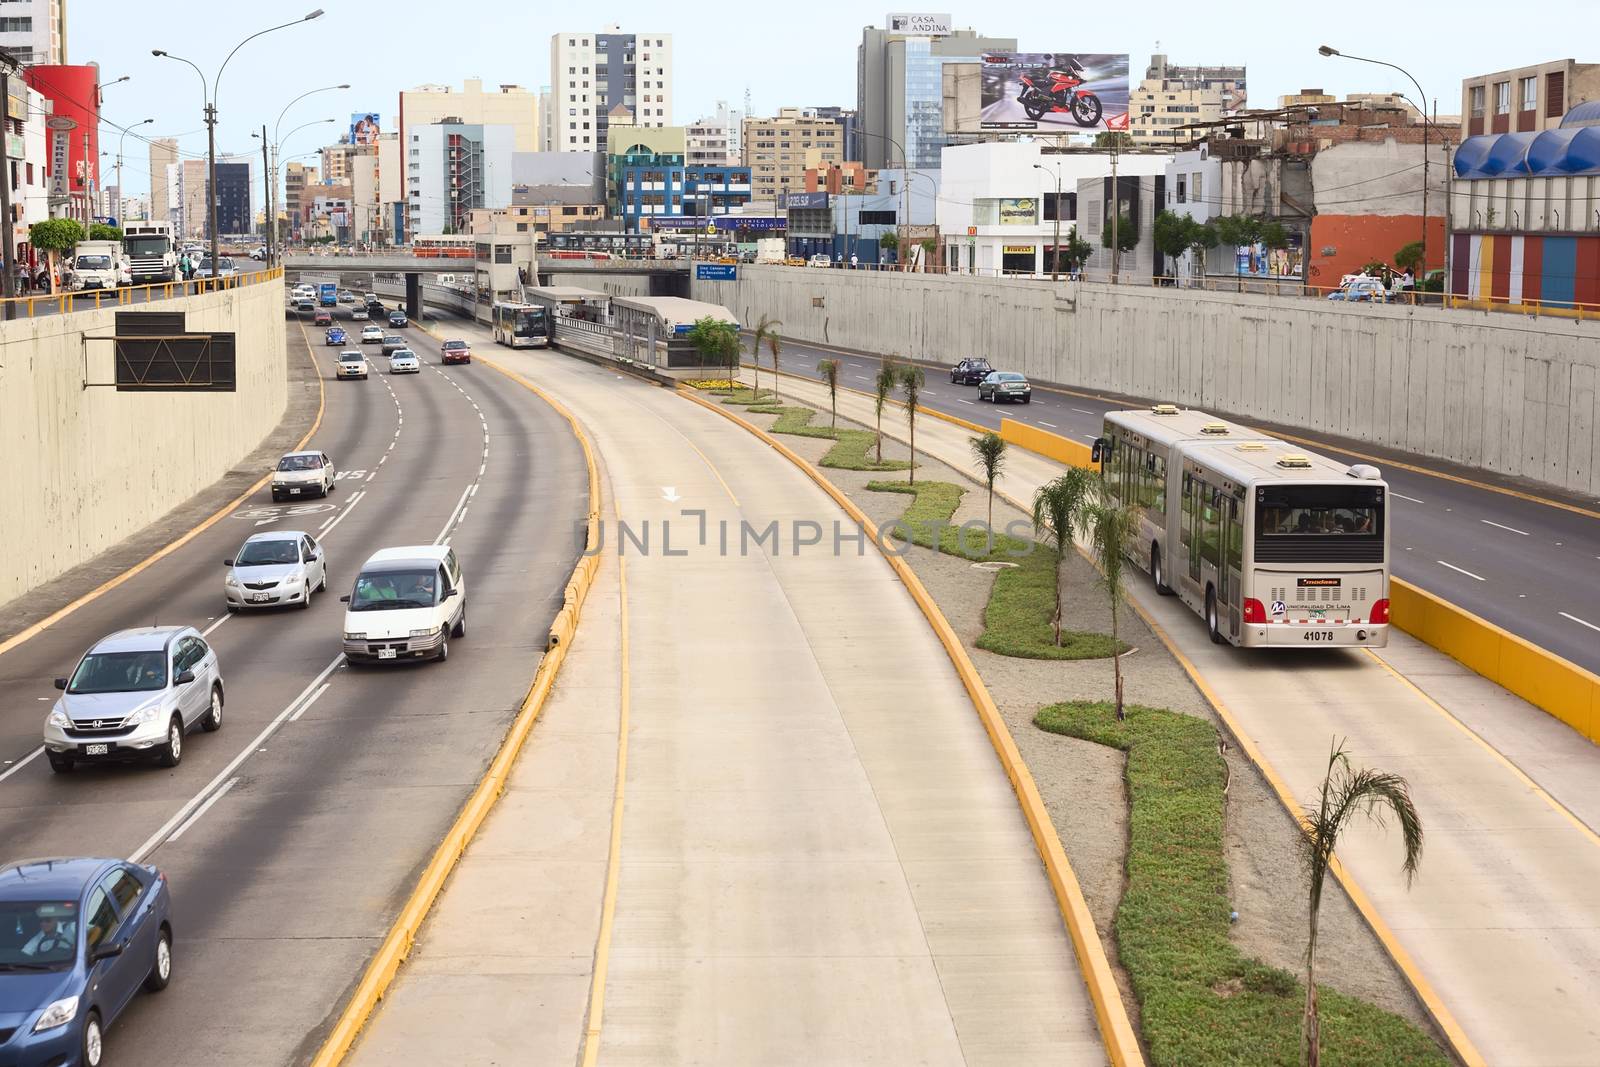 LIMA, PERU - FEBRUARY 13, 2012: Metropolitano bus stop at the crossing of the Avenues Ricardo Palma and Paseo de la Republica in Miraflores on February 13, 2012 in Lima, Peru. The Metropolitano is a Bus rapid transit system operating since 2010 in Lima running from North to South.